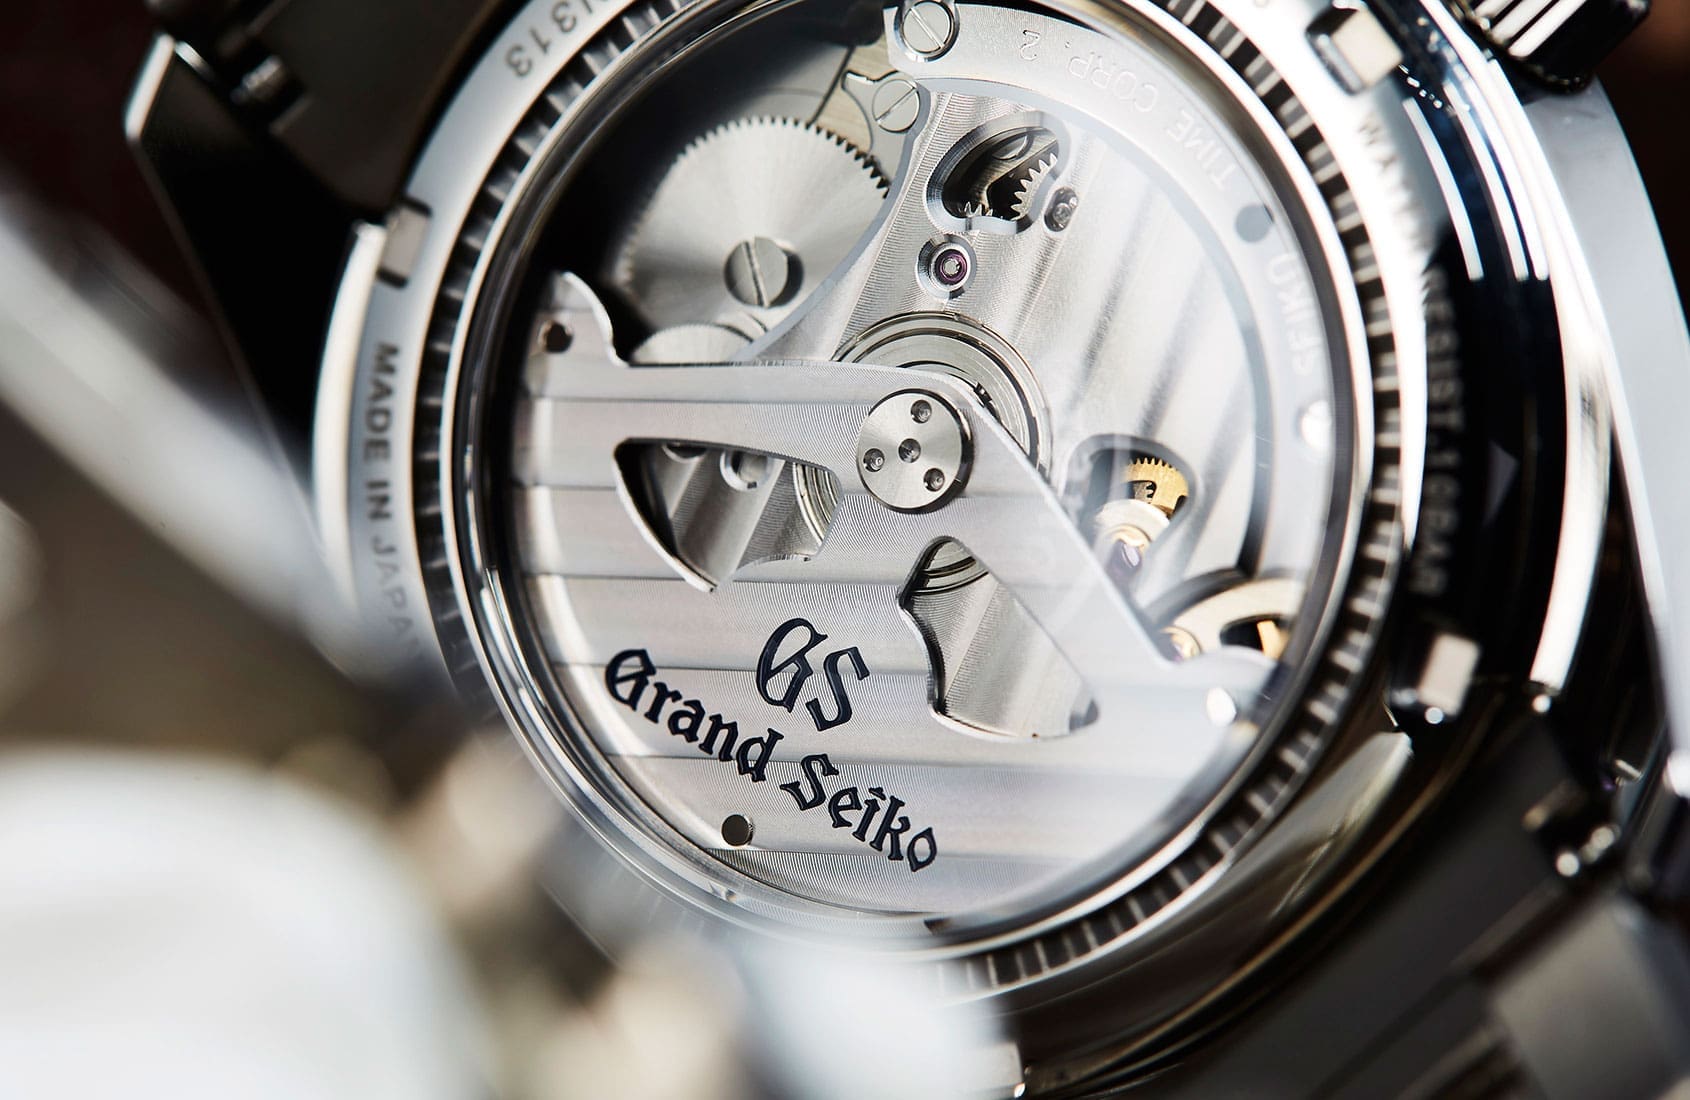 Grand Seiko Spring Drive Technology Explained in 2 Minutes – Video